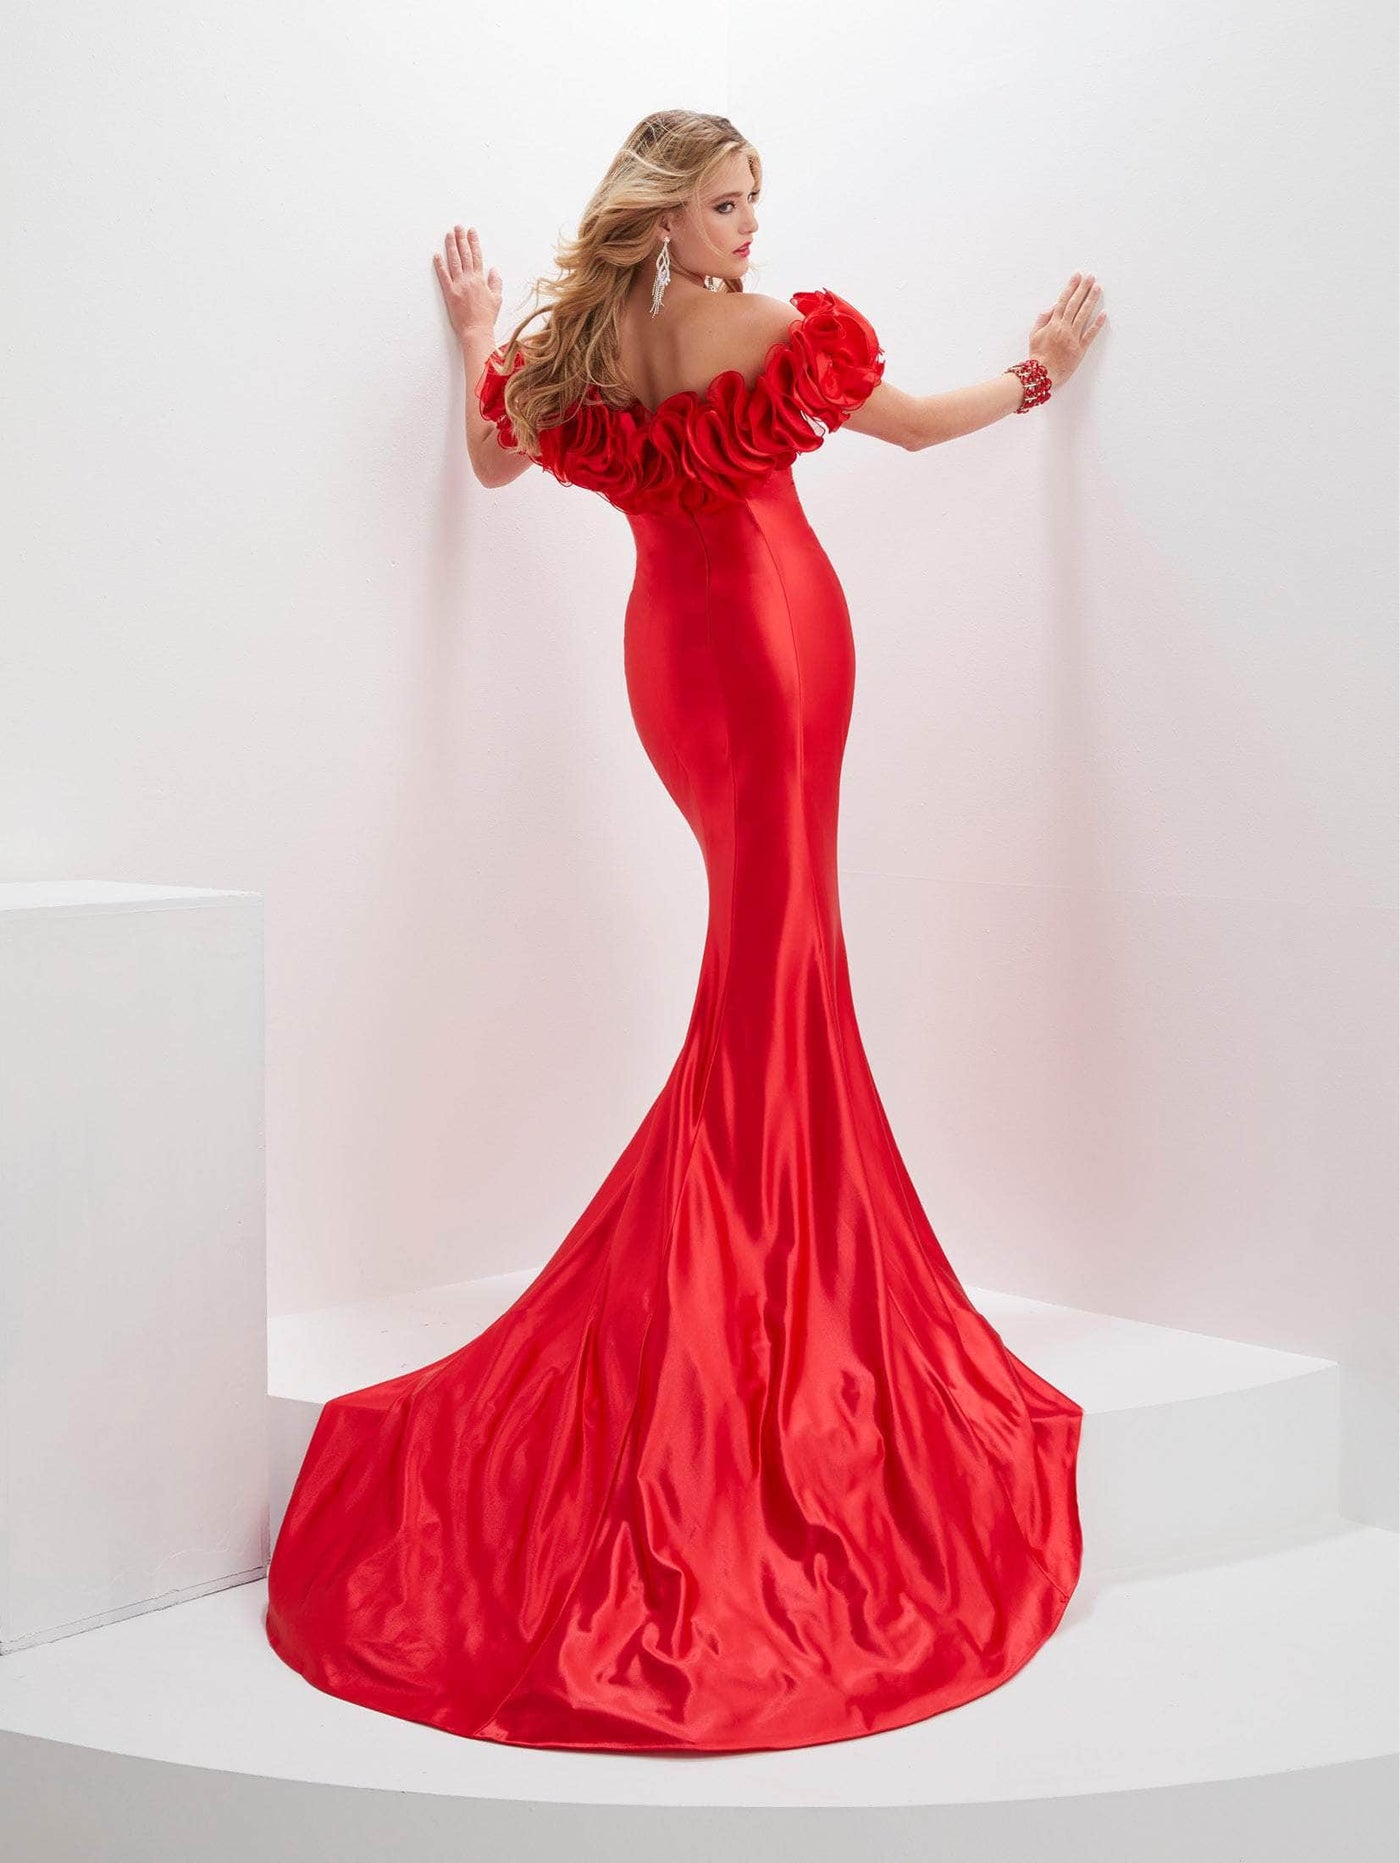 Panoply 14126 - Off Shoulder Ruffle Evening Gown Special Occasion Dress